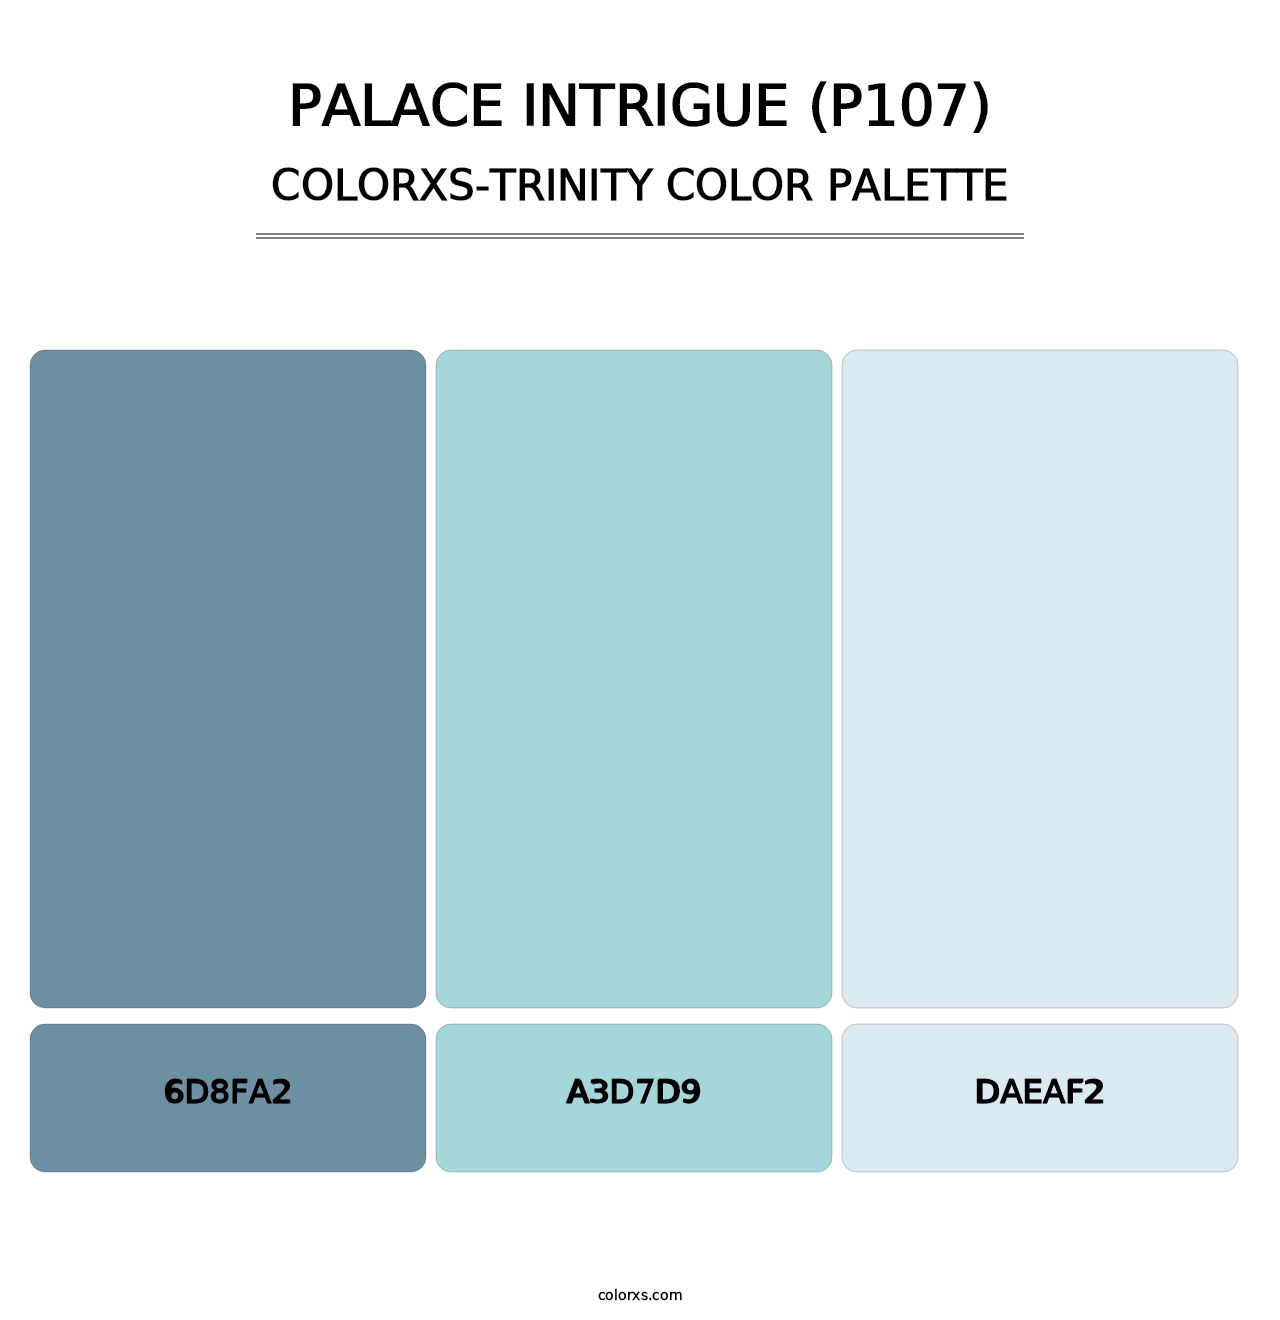 Palace Intrigue (P107) - Colorxs Trinity Palette